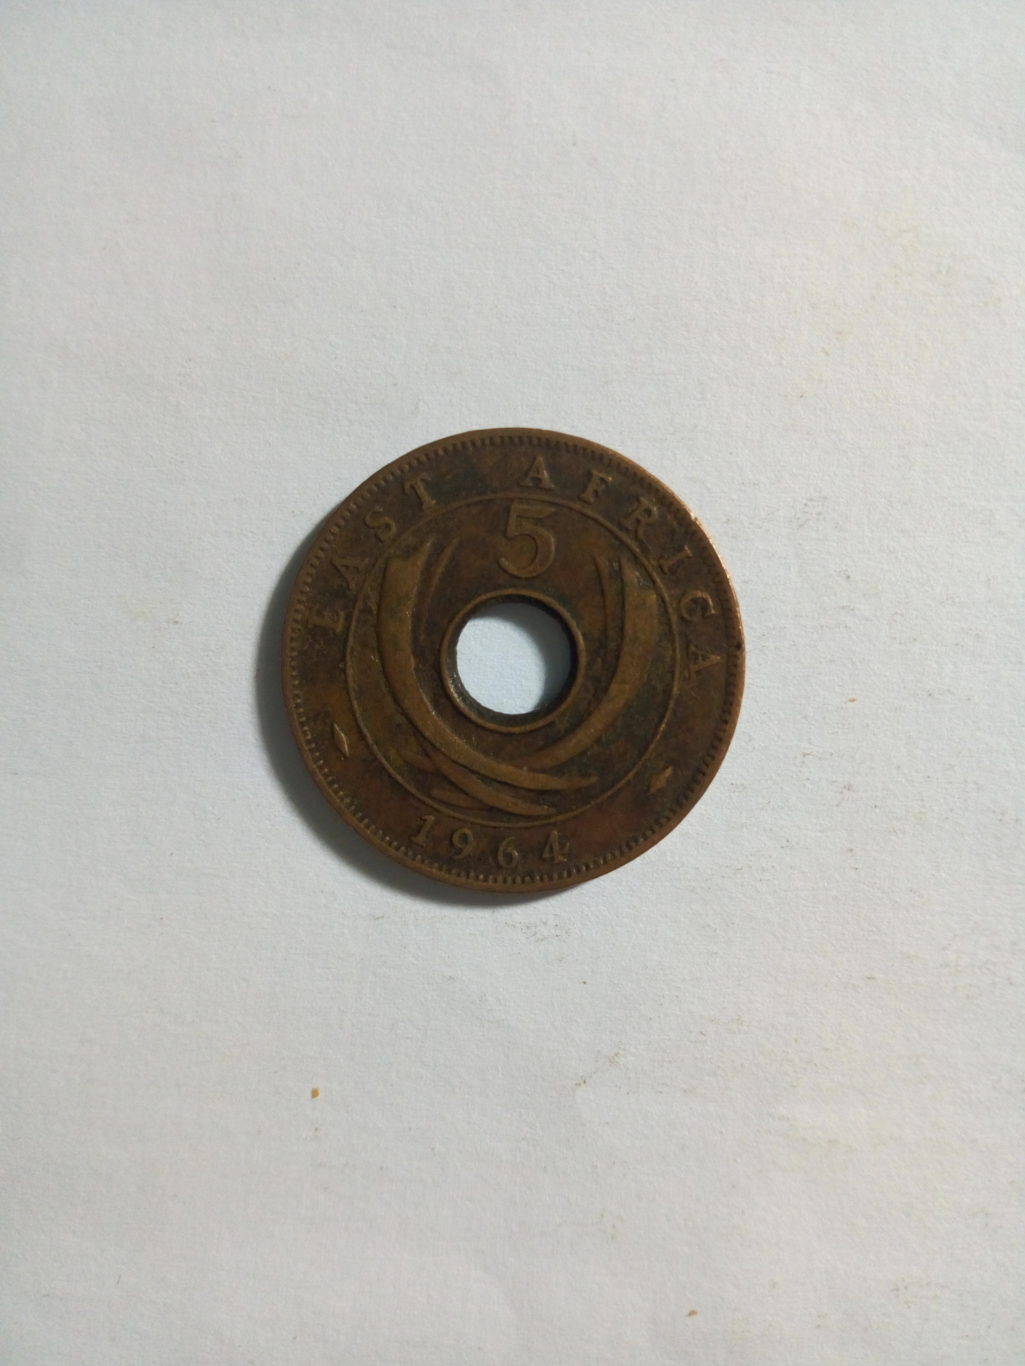 1964_east Africa 5 cents